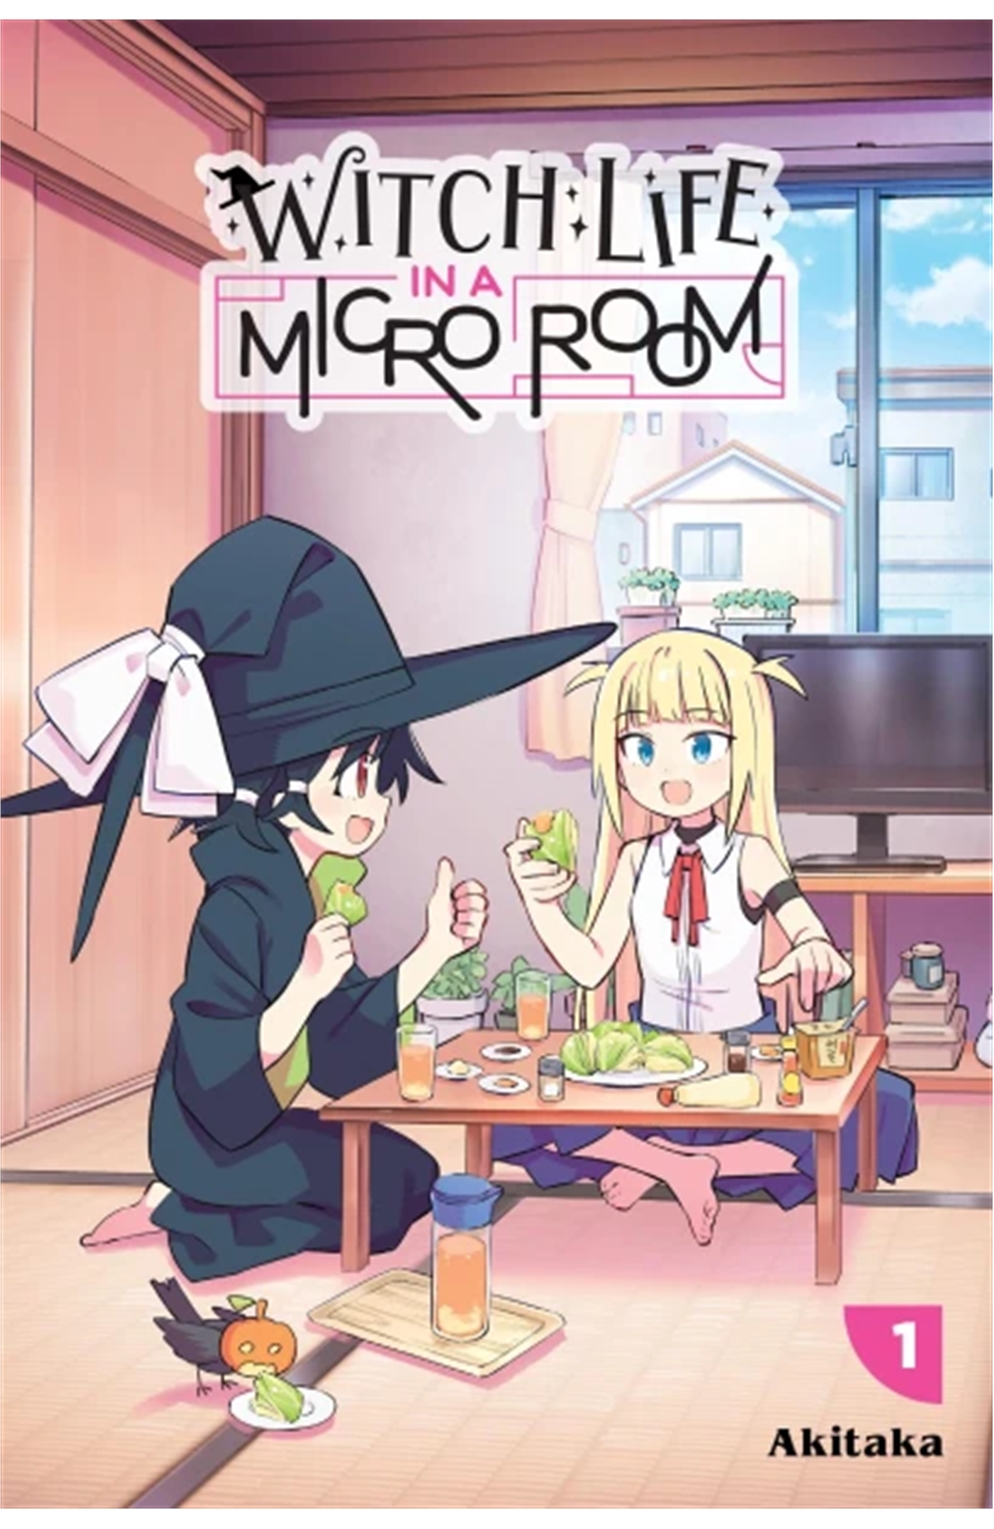 Witch Life in a Micro Room Manga Volume 1